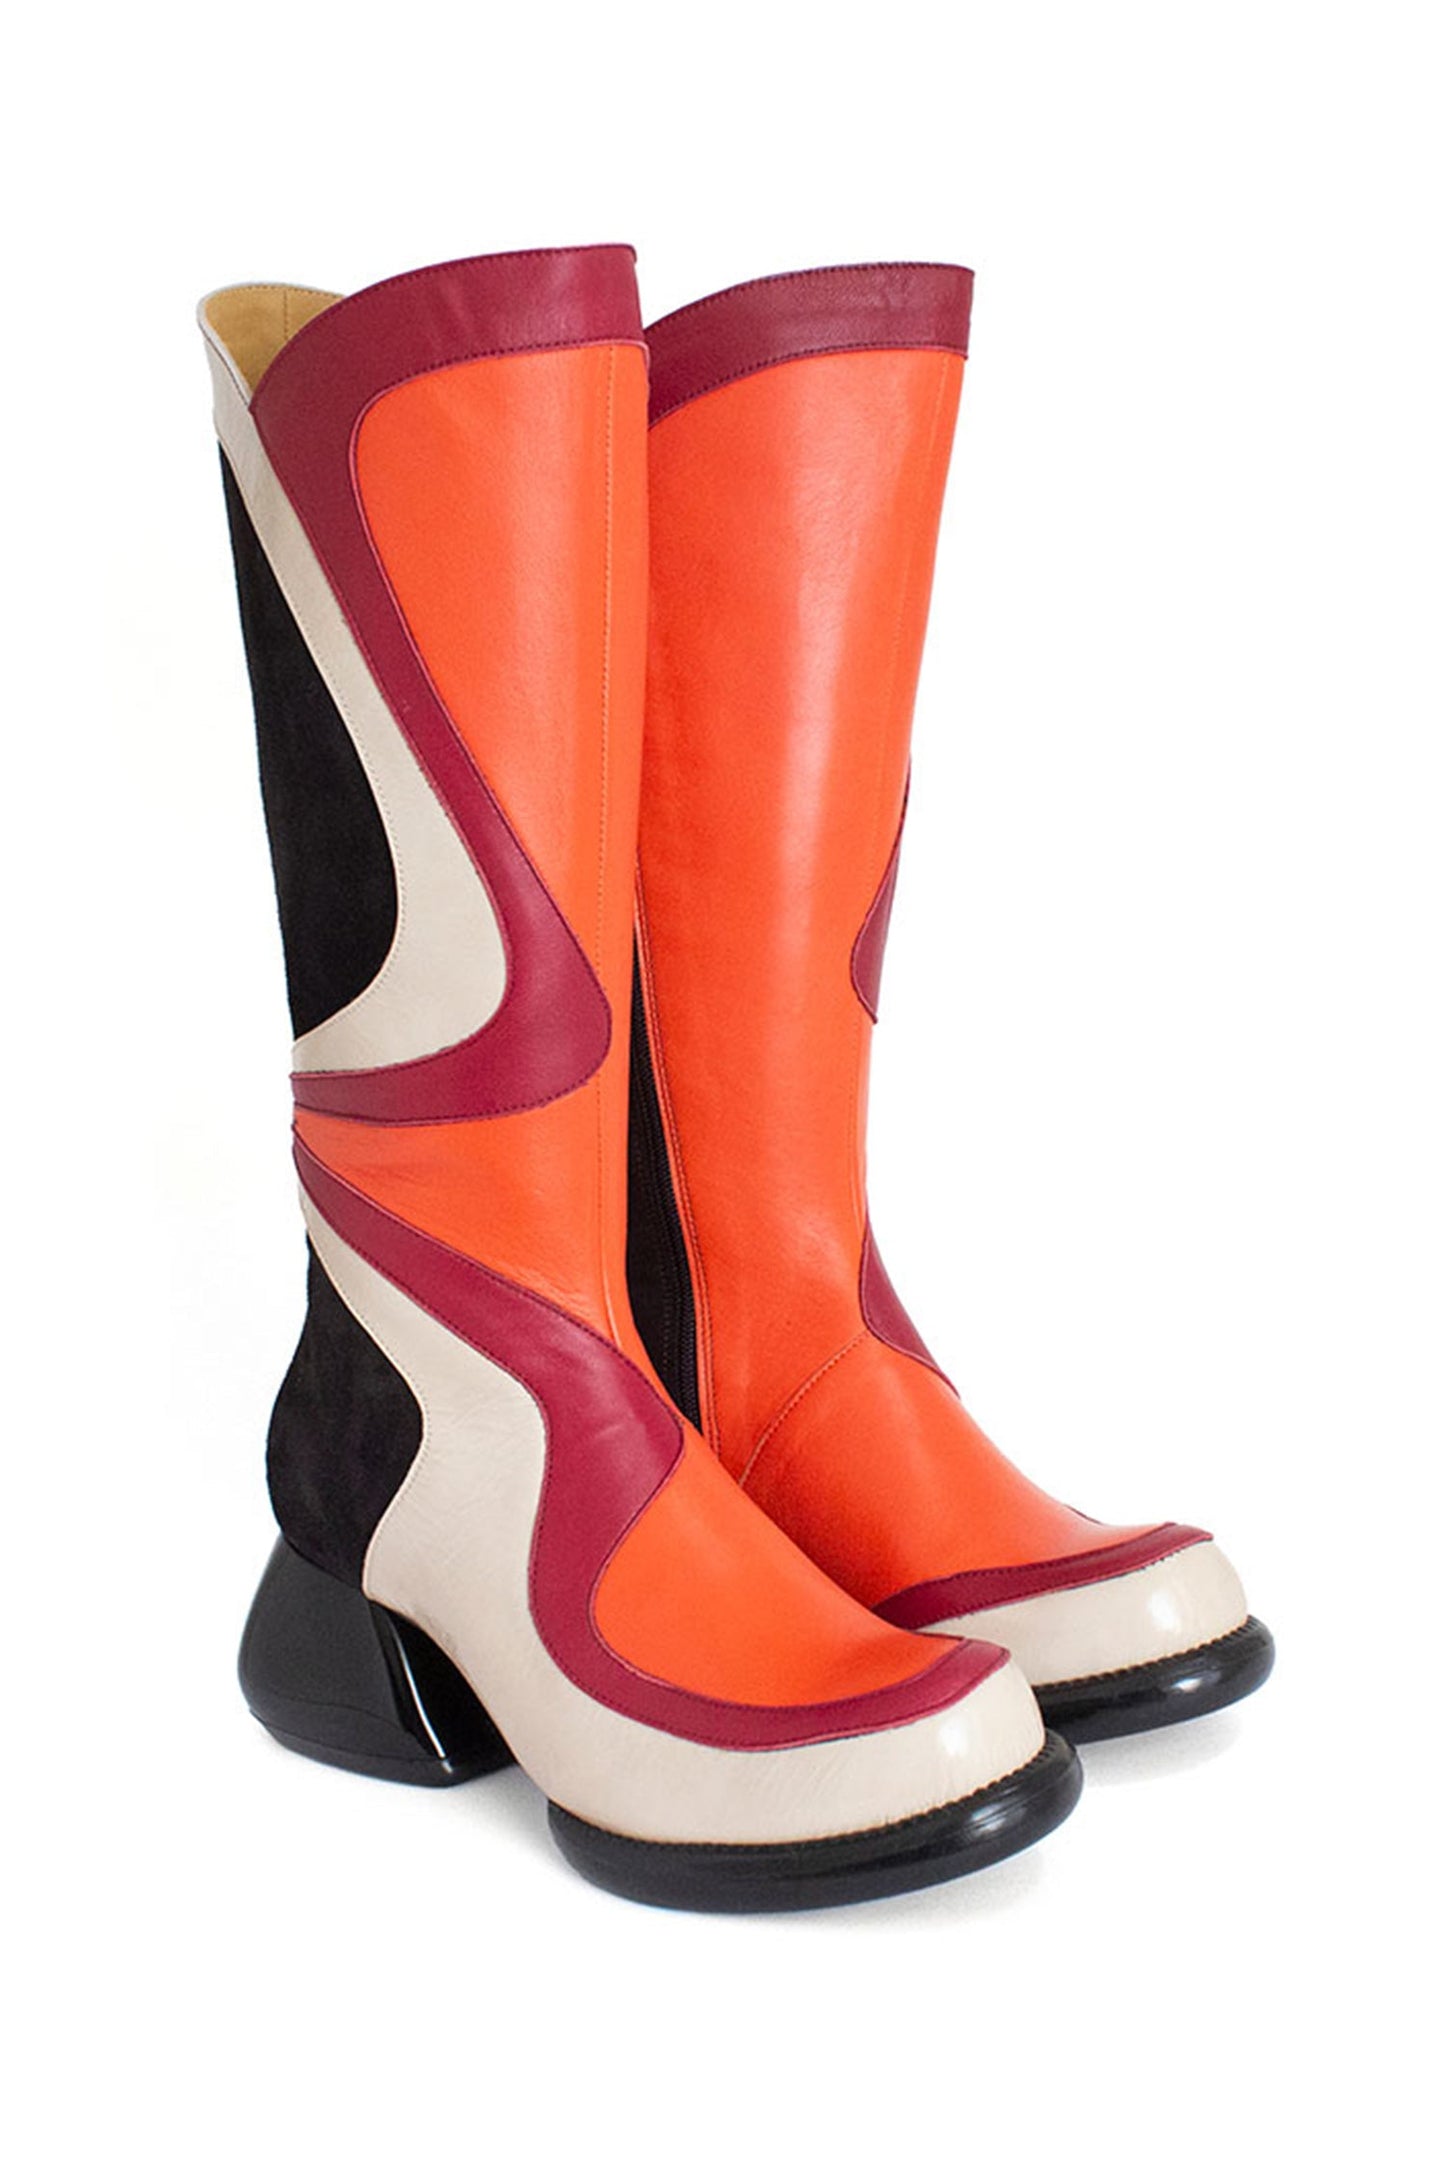 Anna Sui x John Fluevog, front Orange wave, a red and a white highlight, black in the back